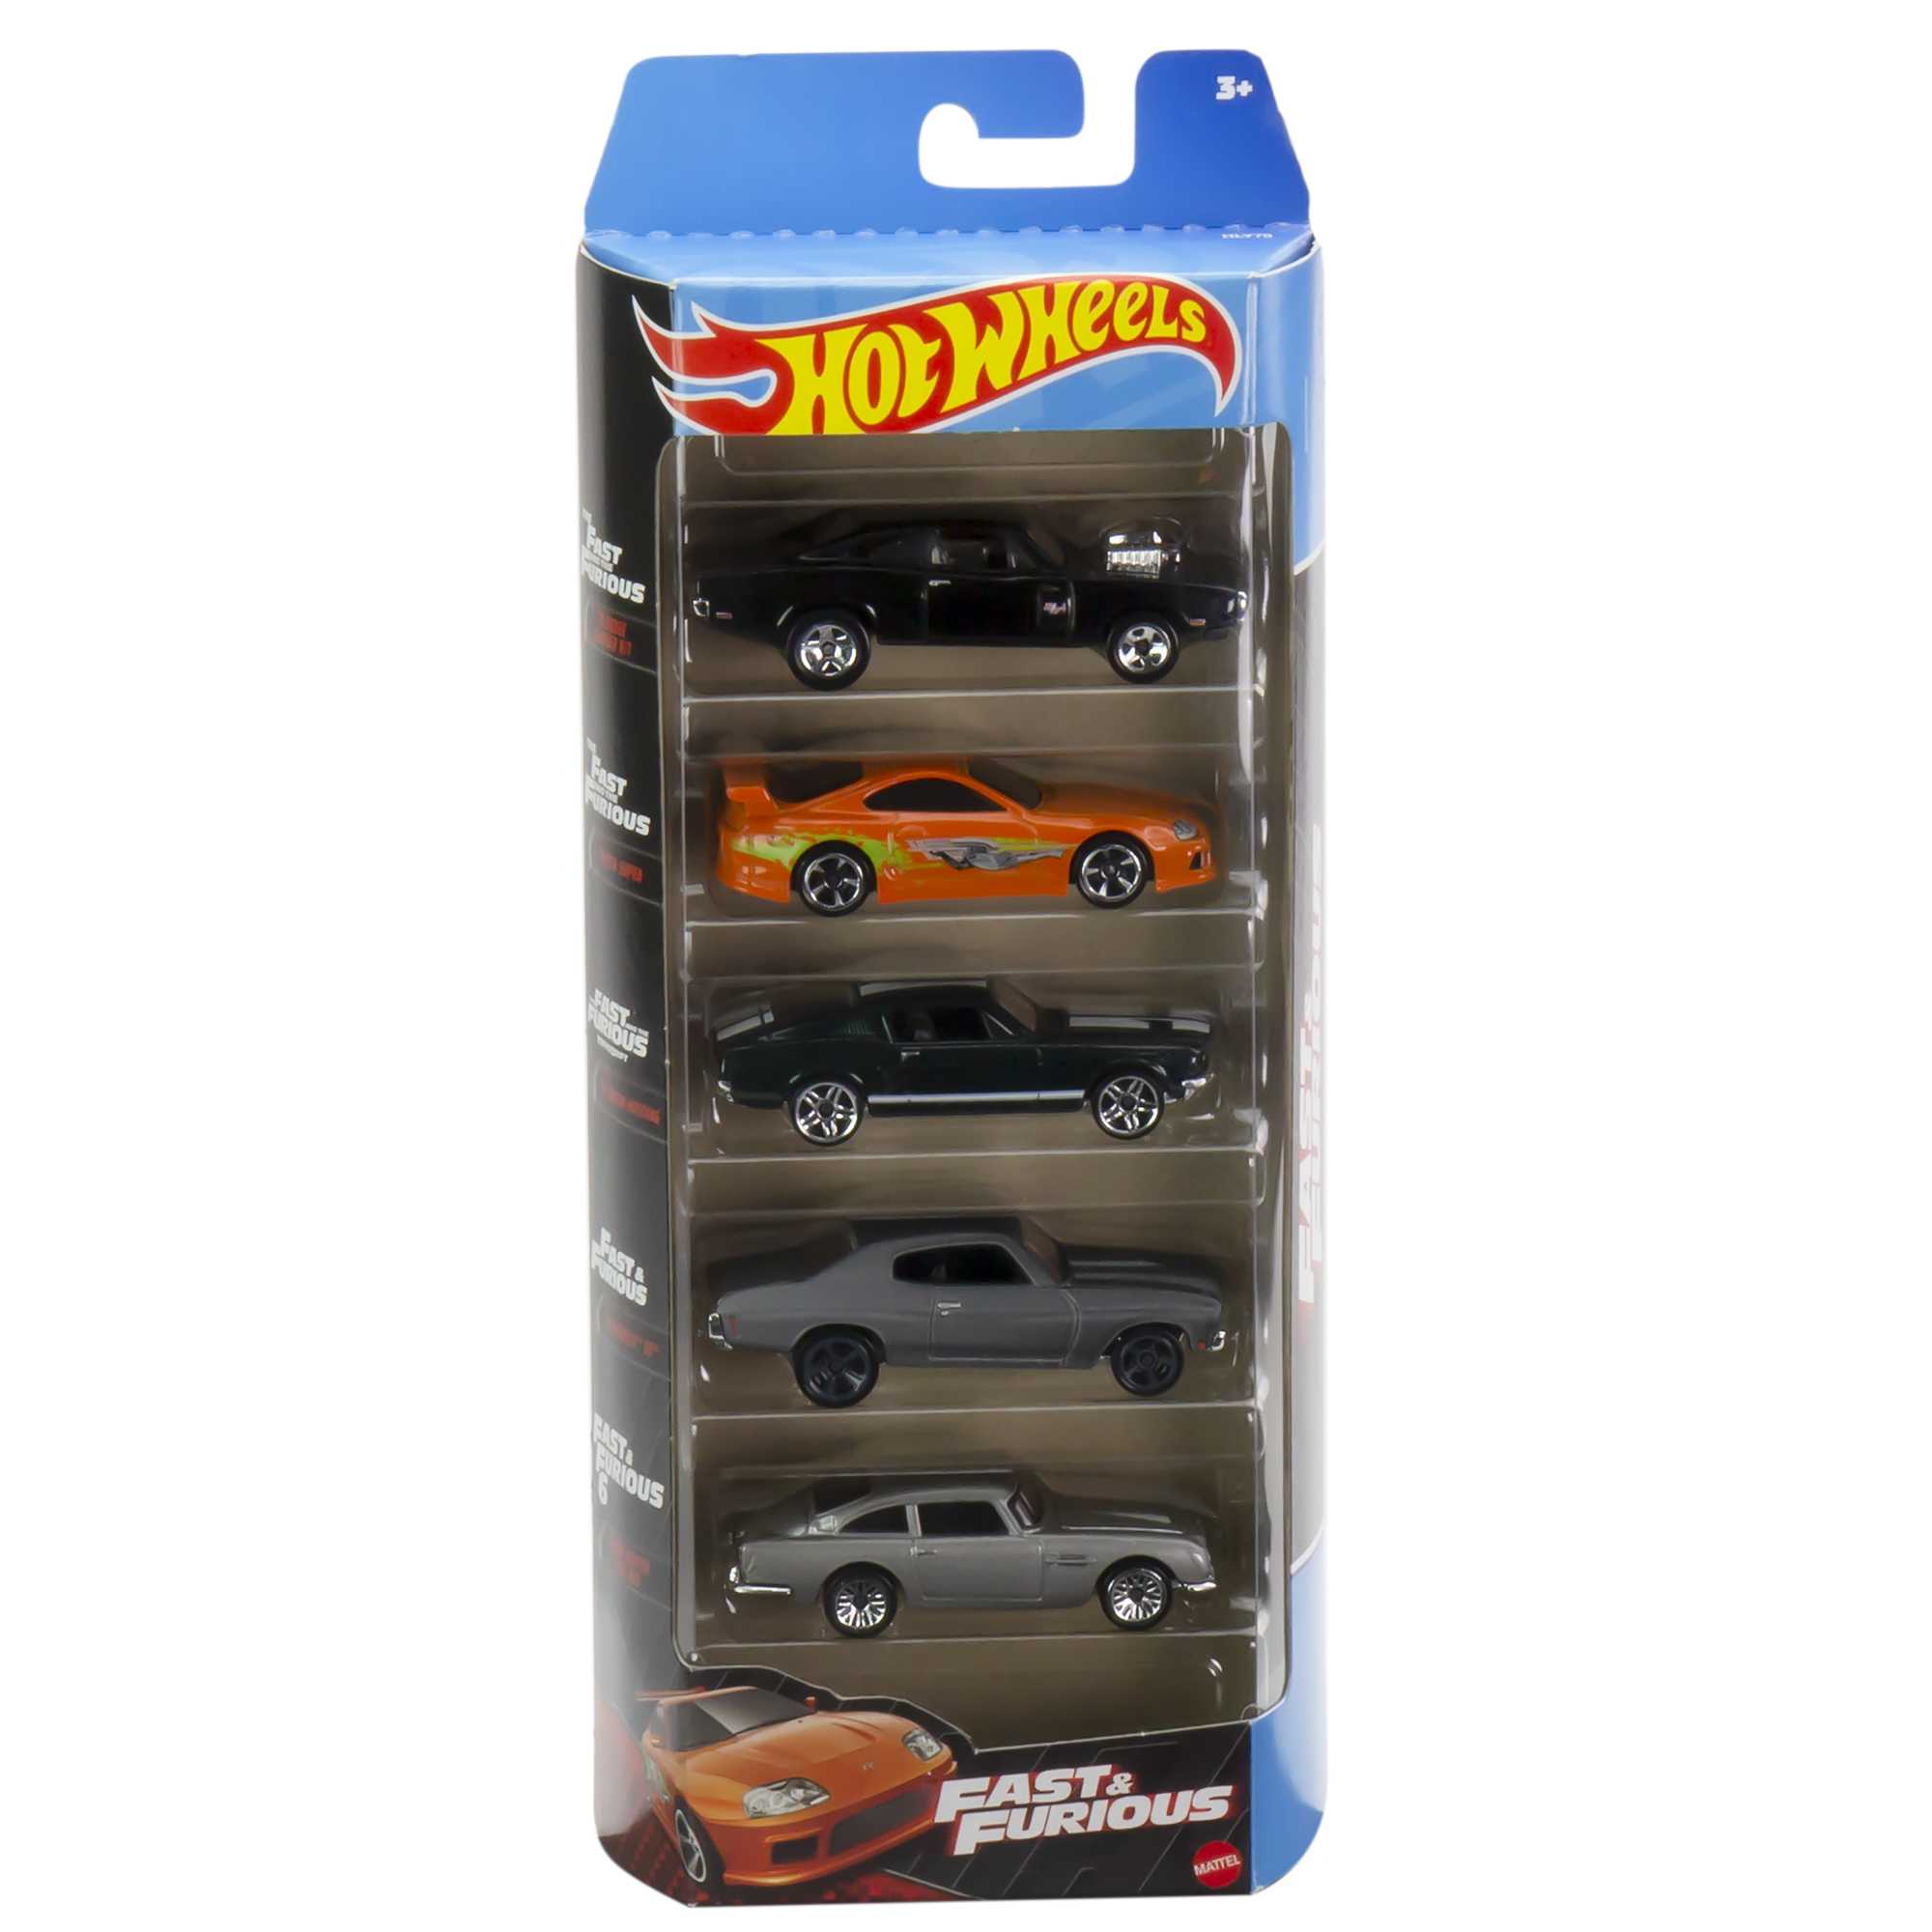 Hot Wheels Fast and Furious Cars | 5-Pack Toy Cars | MATTEL